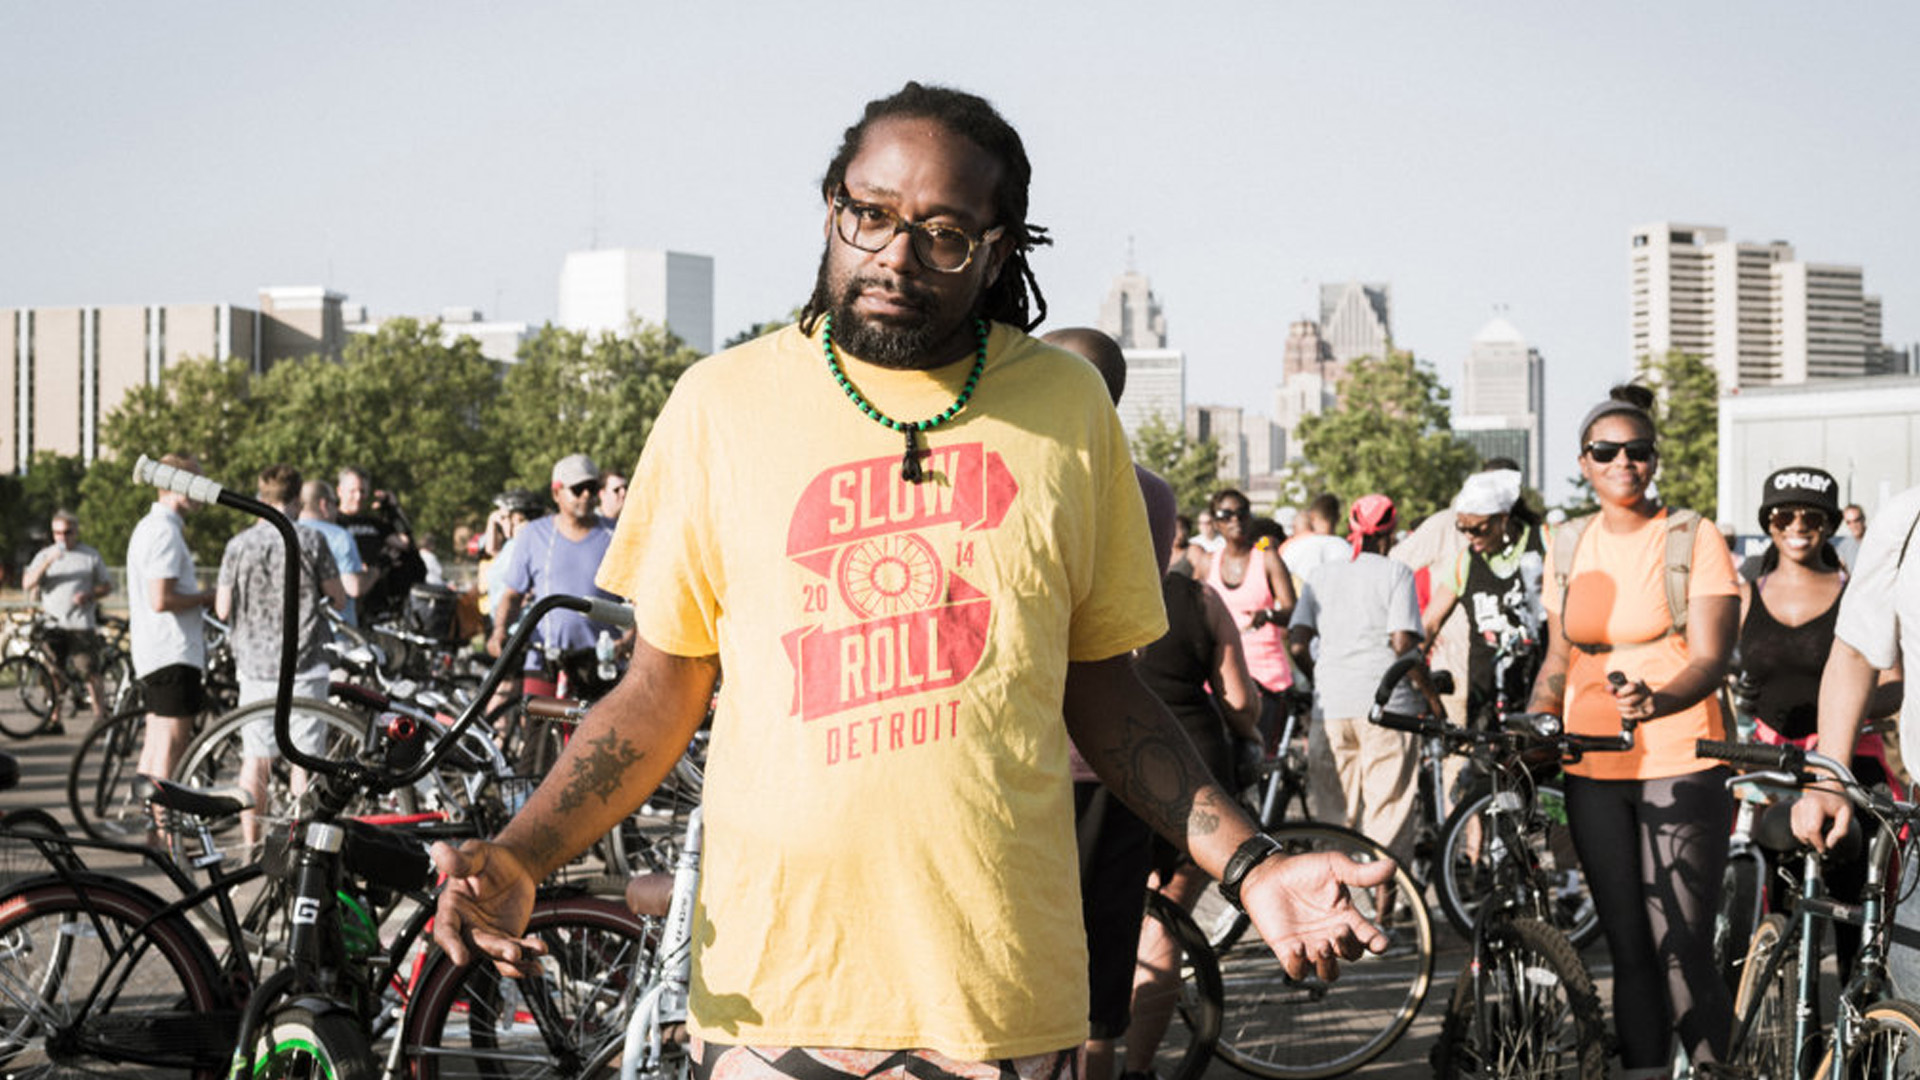 Jason Hall – Founder of Slow Roll Detroit